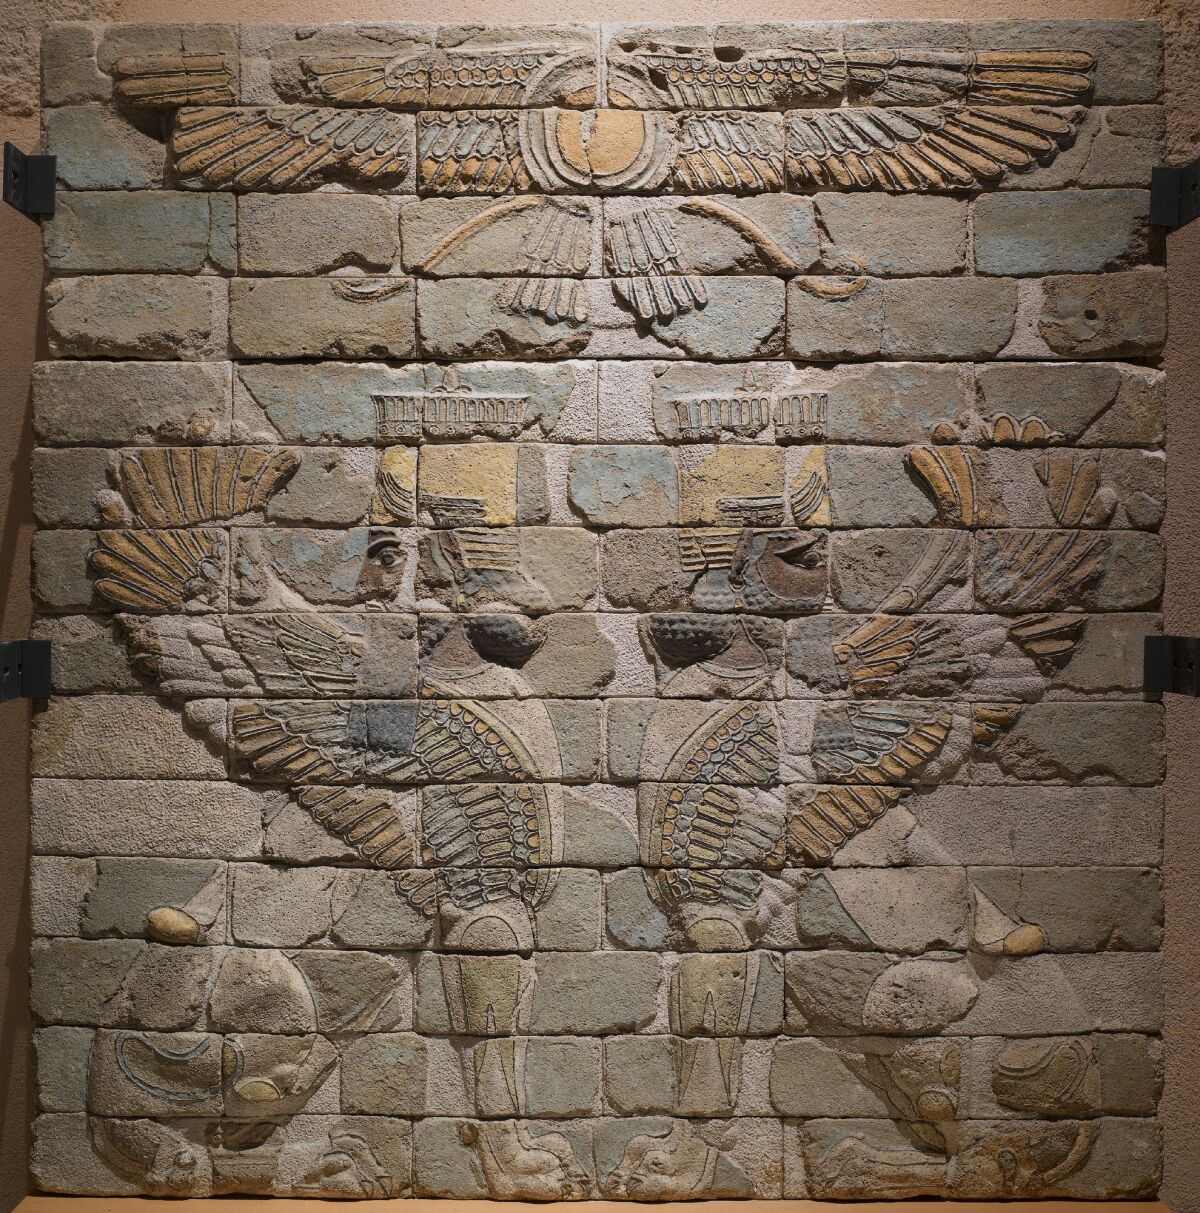 Two carved sphinxes face each other on a brick panel.